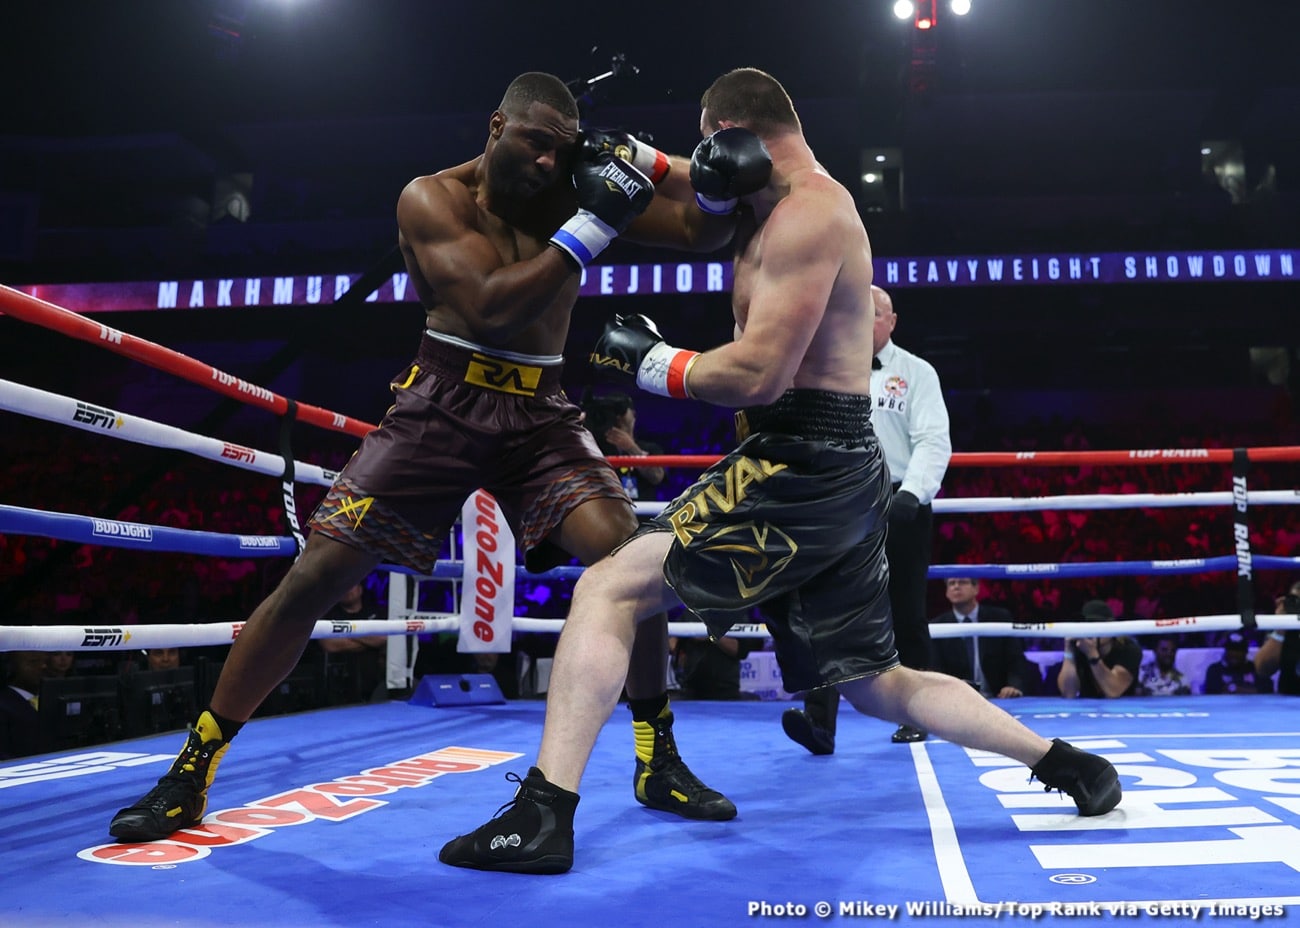 Makhmudov's U.S. Debut Ends with TKO Victory - Boxing Results